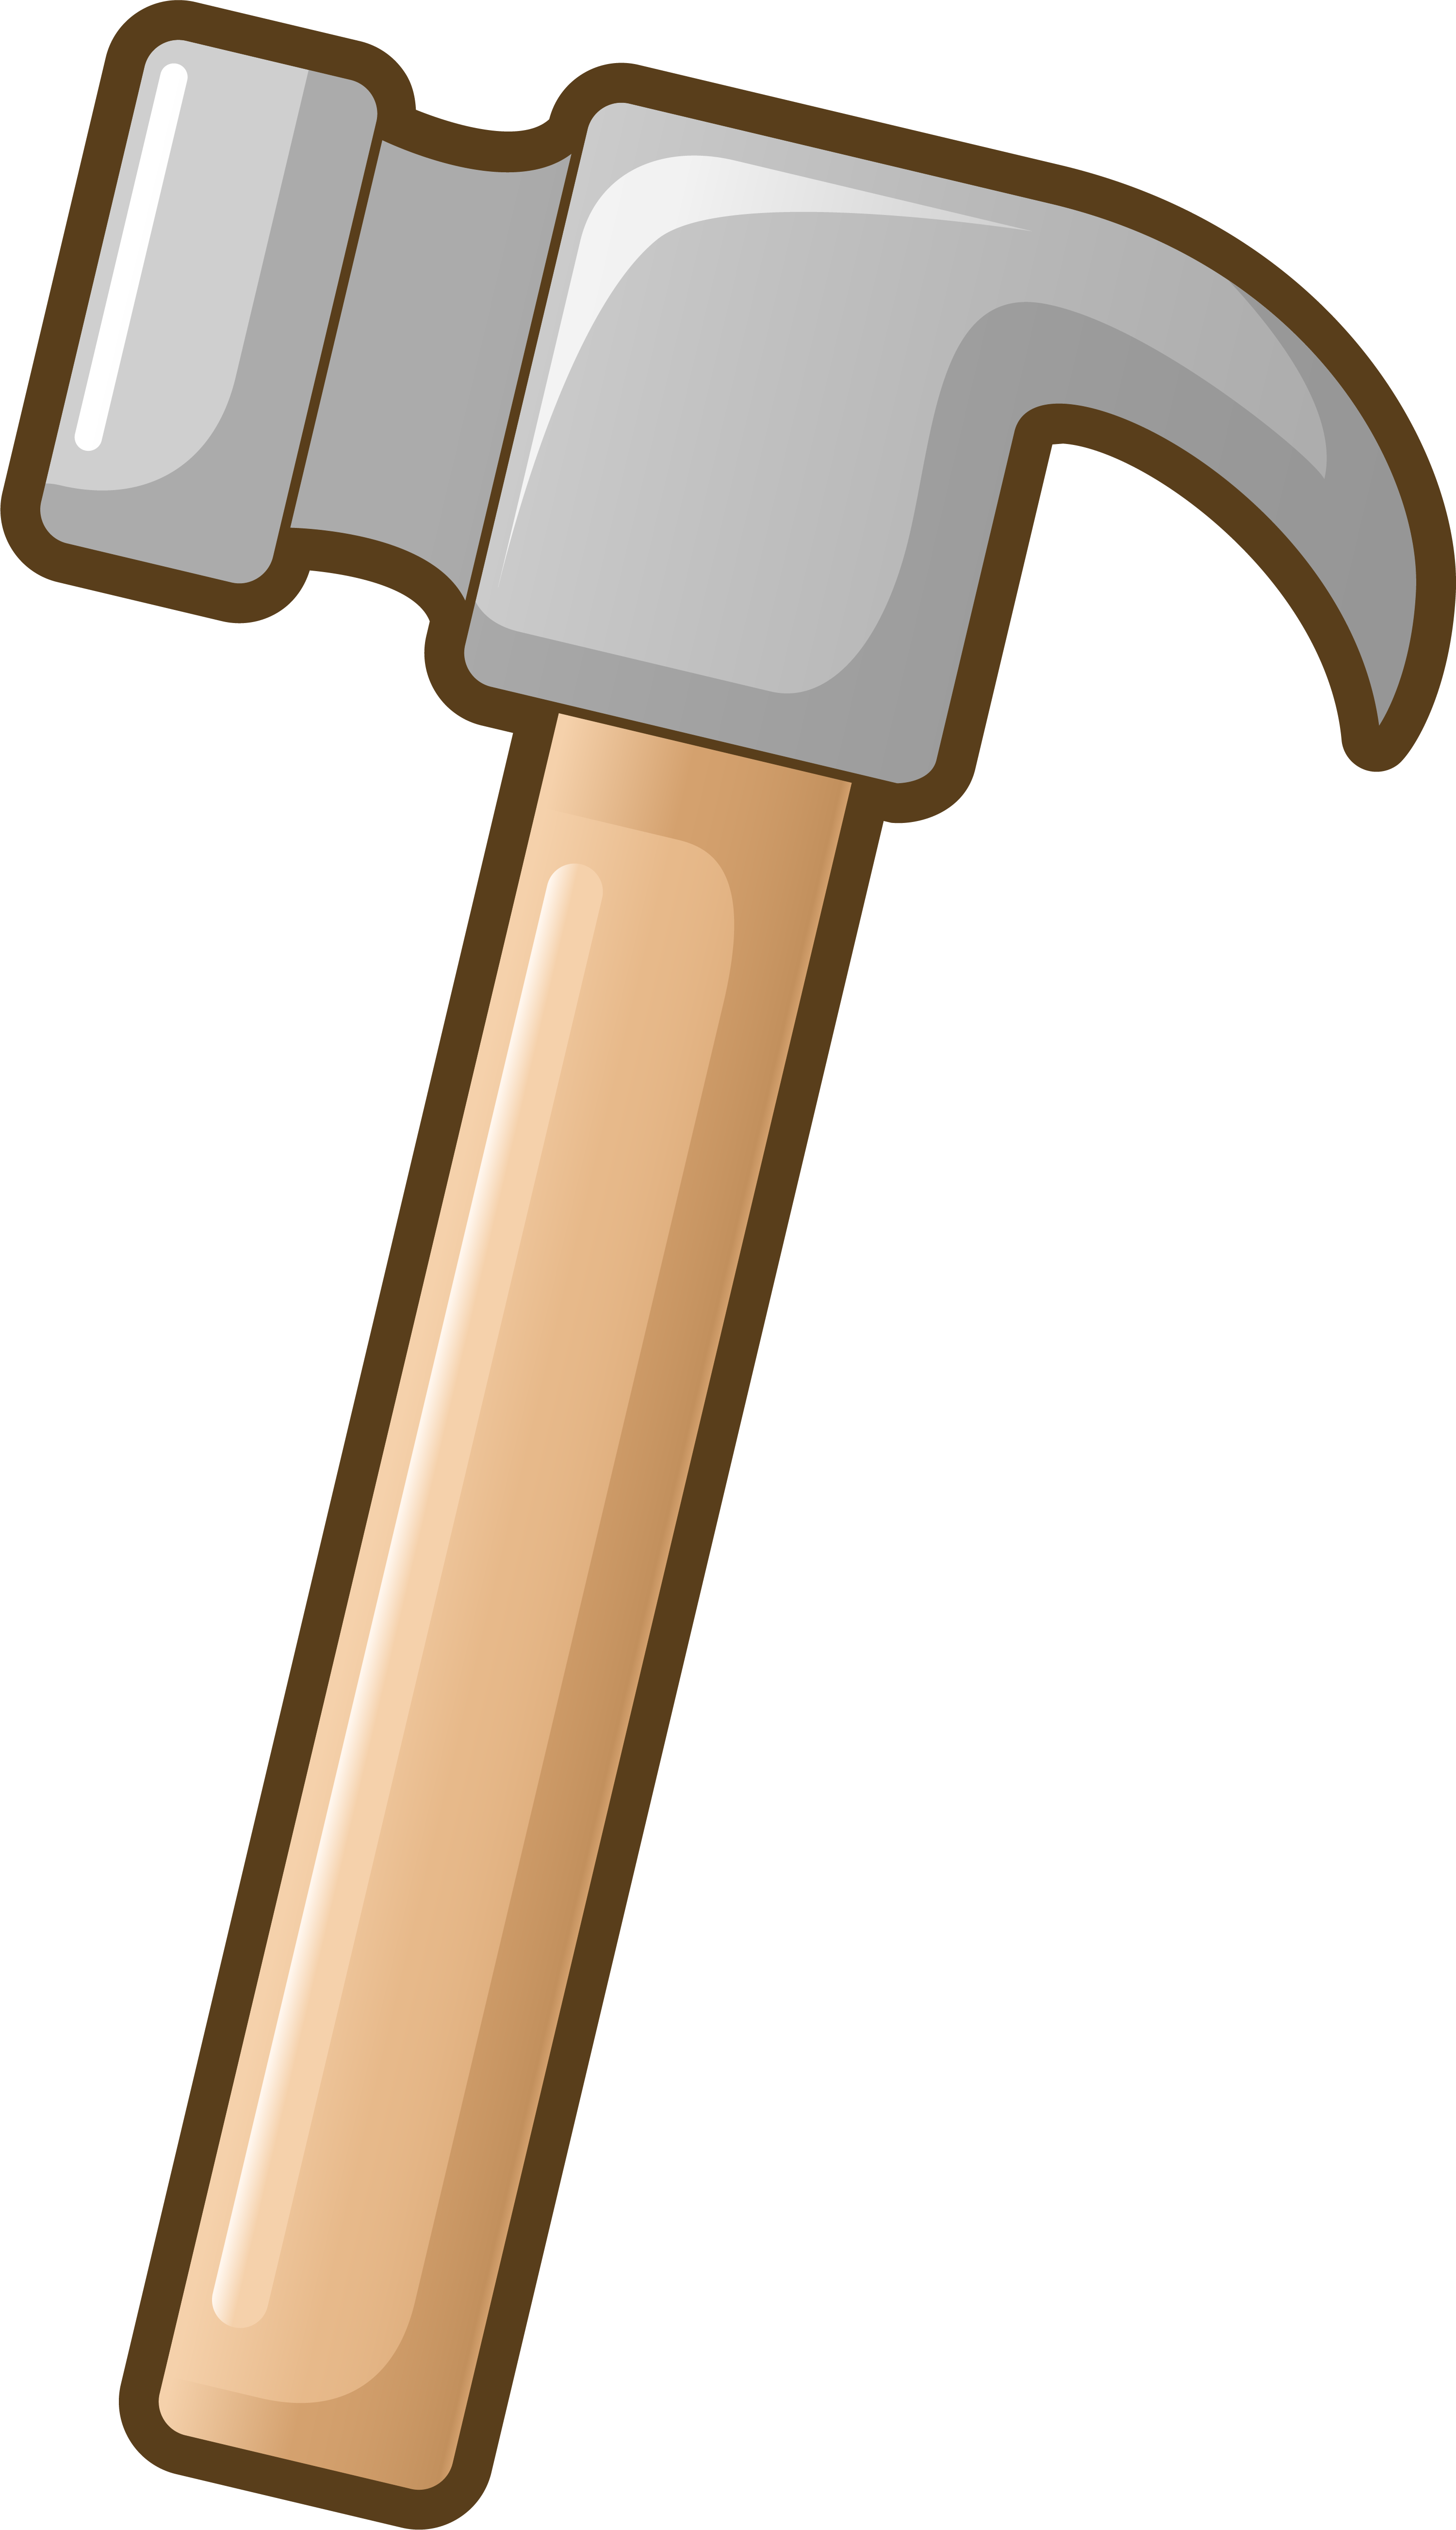 Hammer Cartoon Clipart Clip Art Library | Images and Photos finder